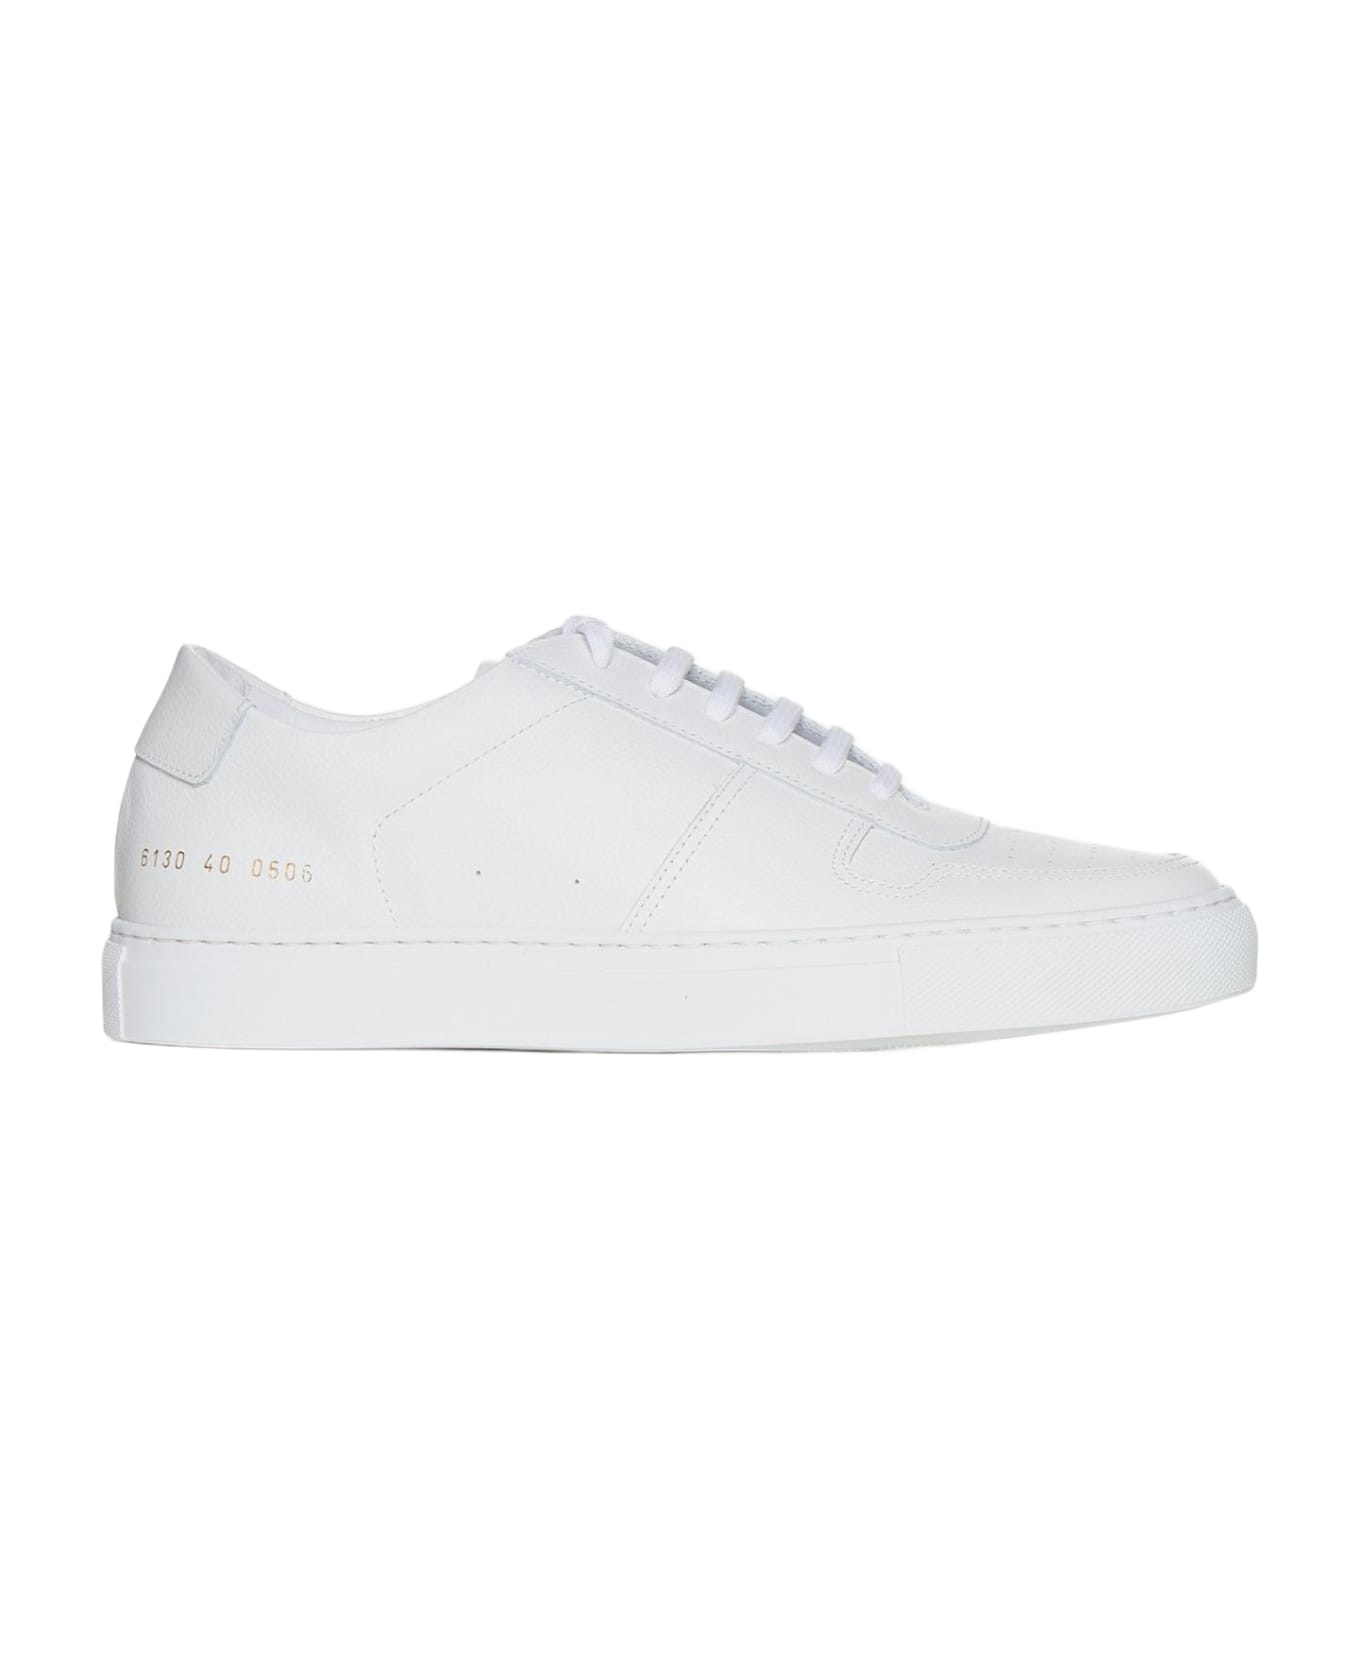 Common Projects Bball Classic Leather Sneakers - Bianco